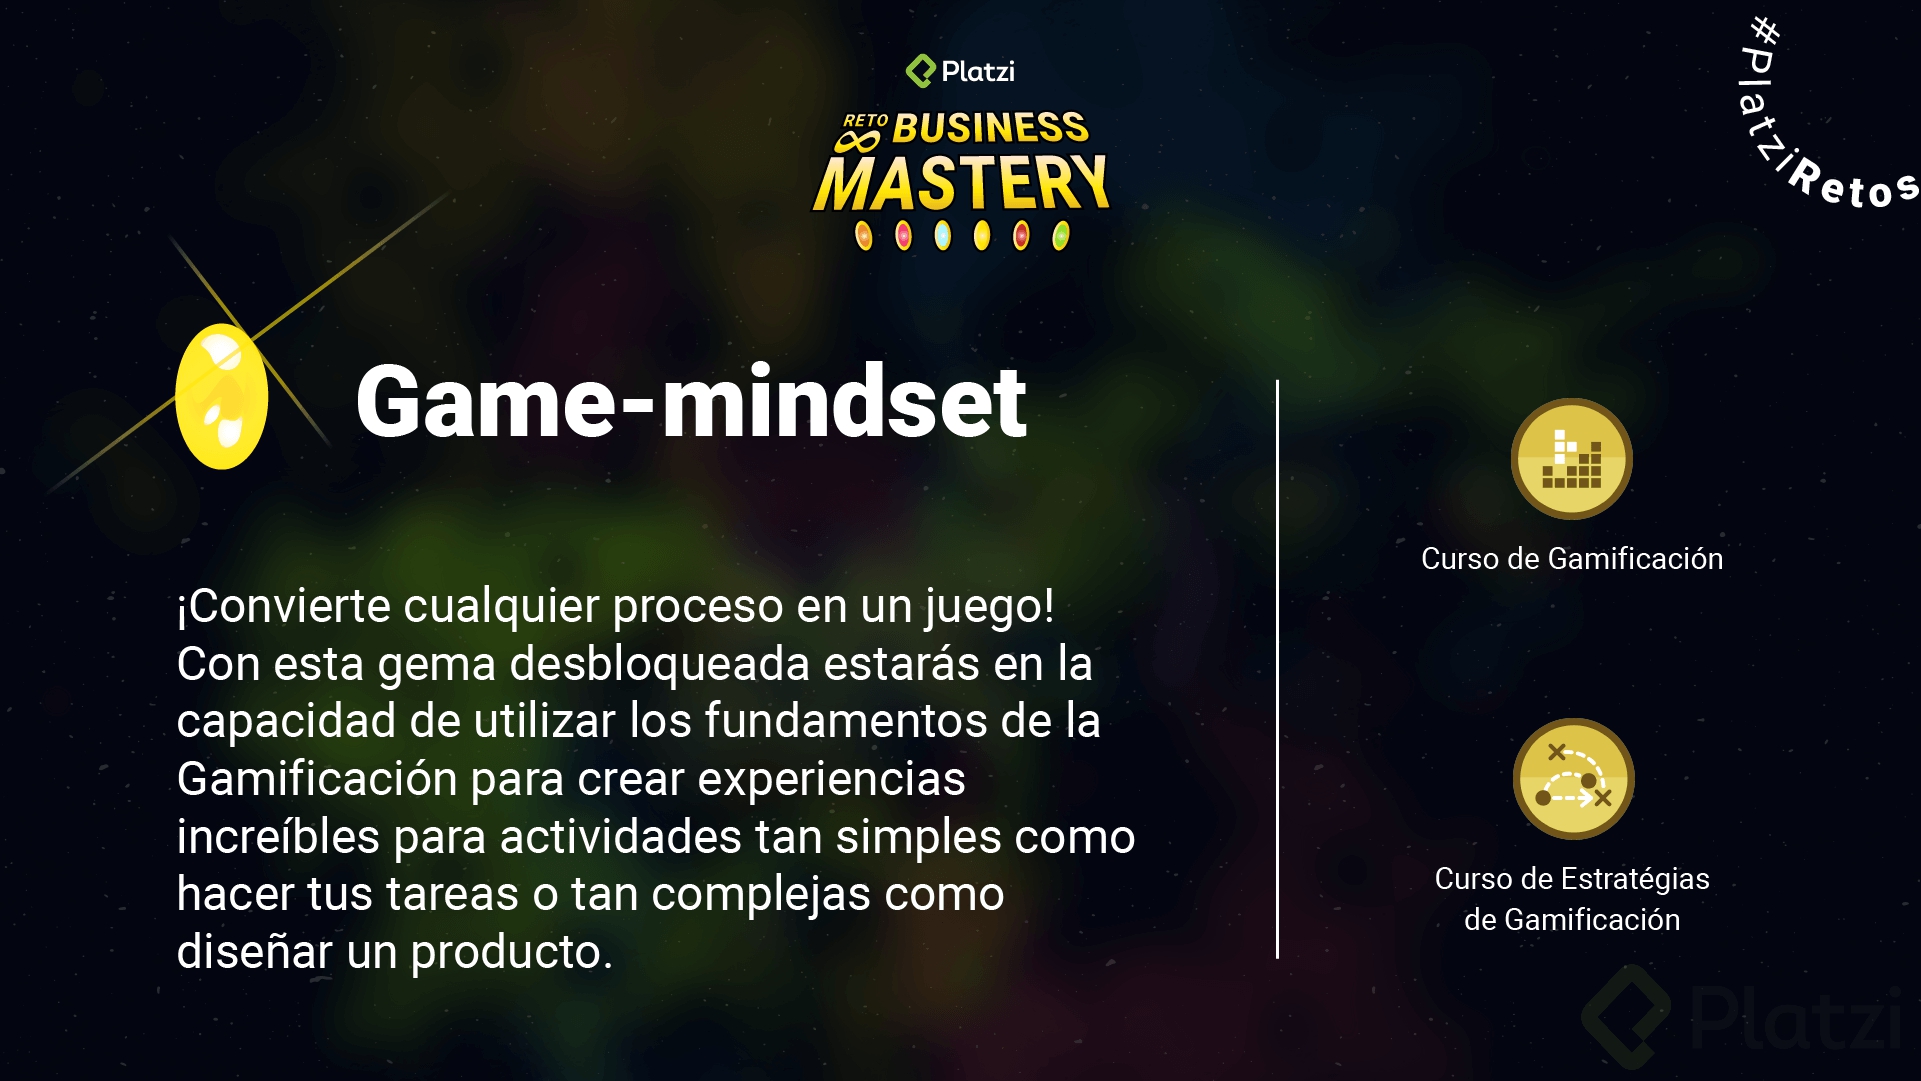 reto-business-mastery_16-9-game-mindset.png